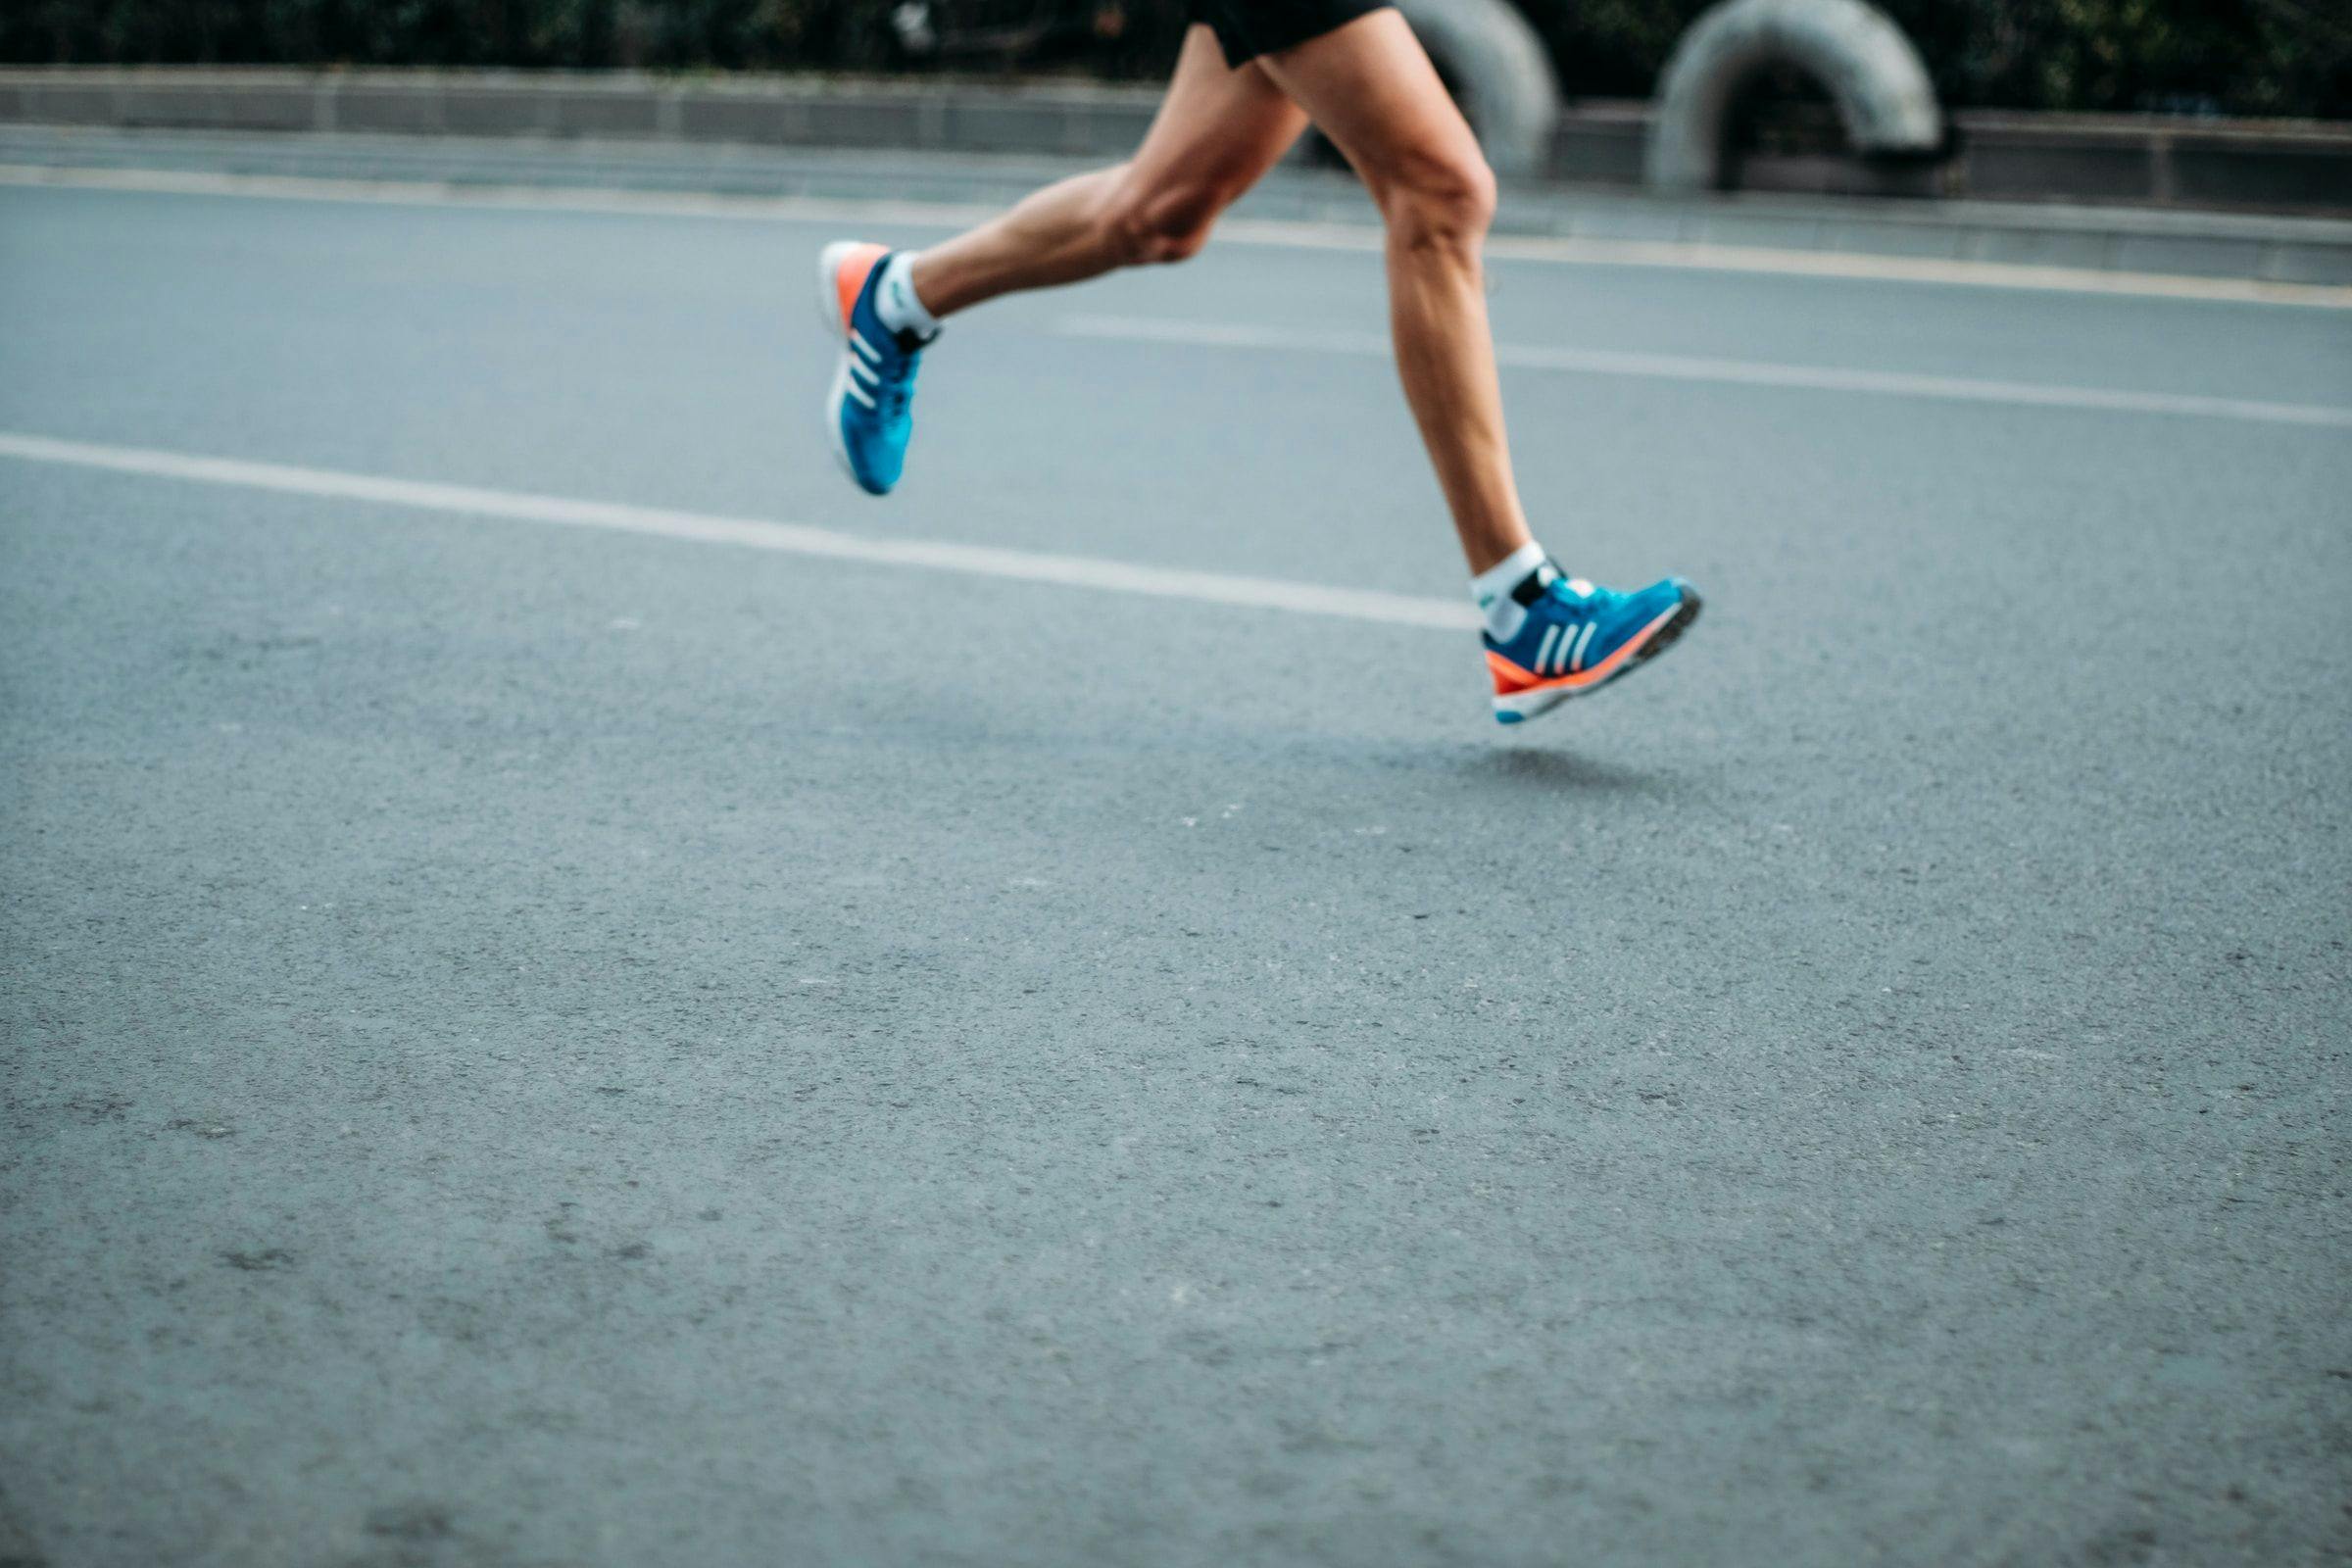 A person in running shoes running on a road.